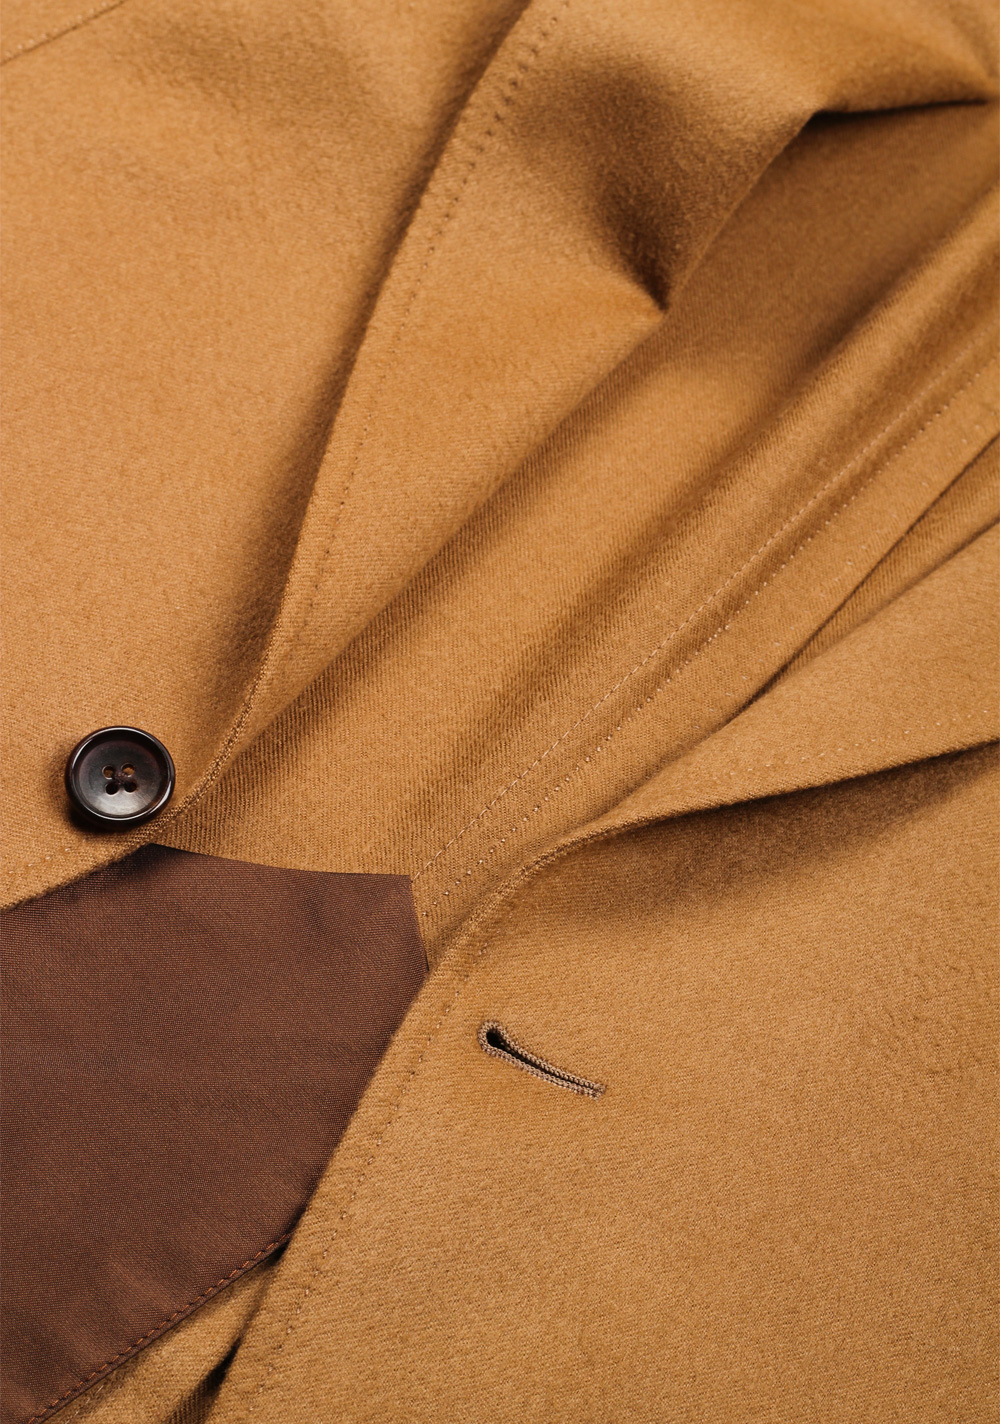 TOM FORD O’Connor Camel Sport Coat Size 52 / 42R in Cashmere | Costume Limité